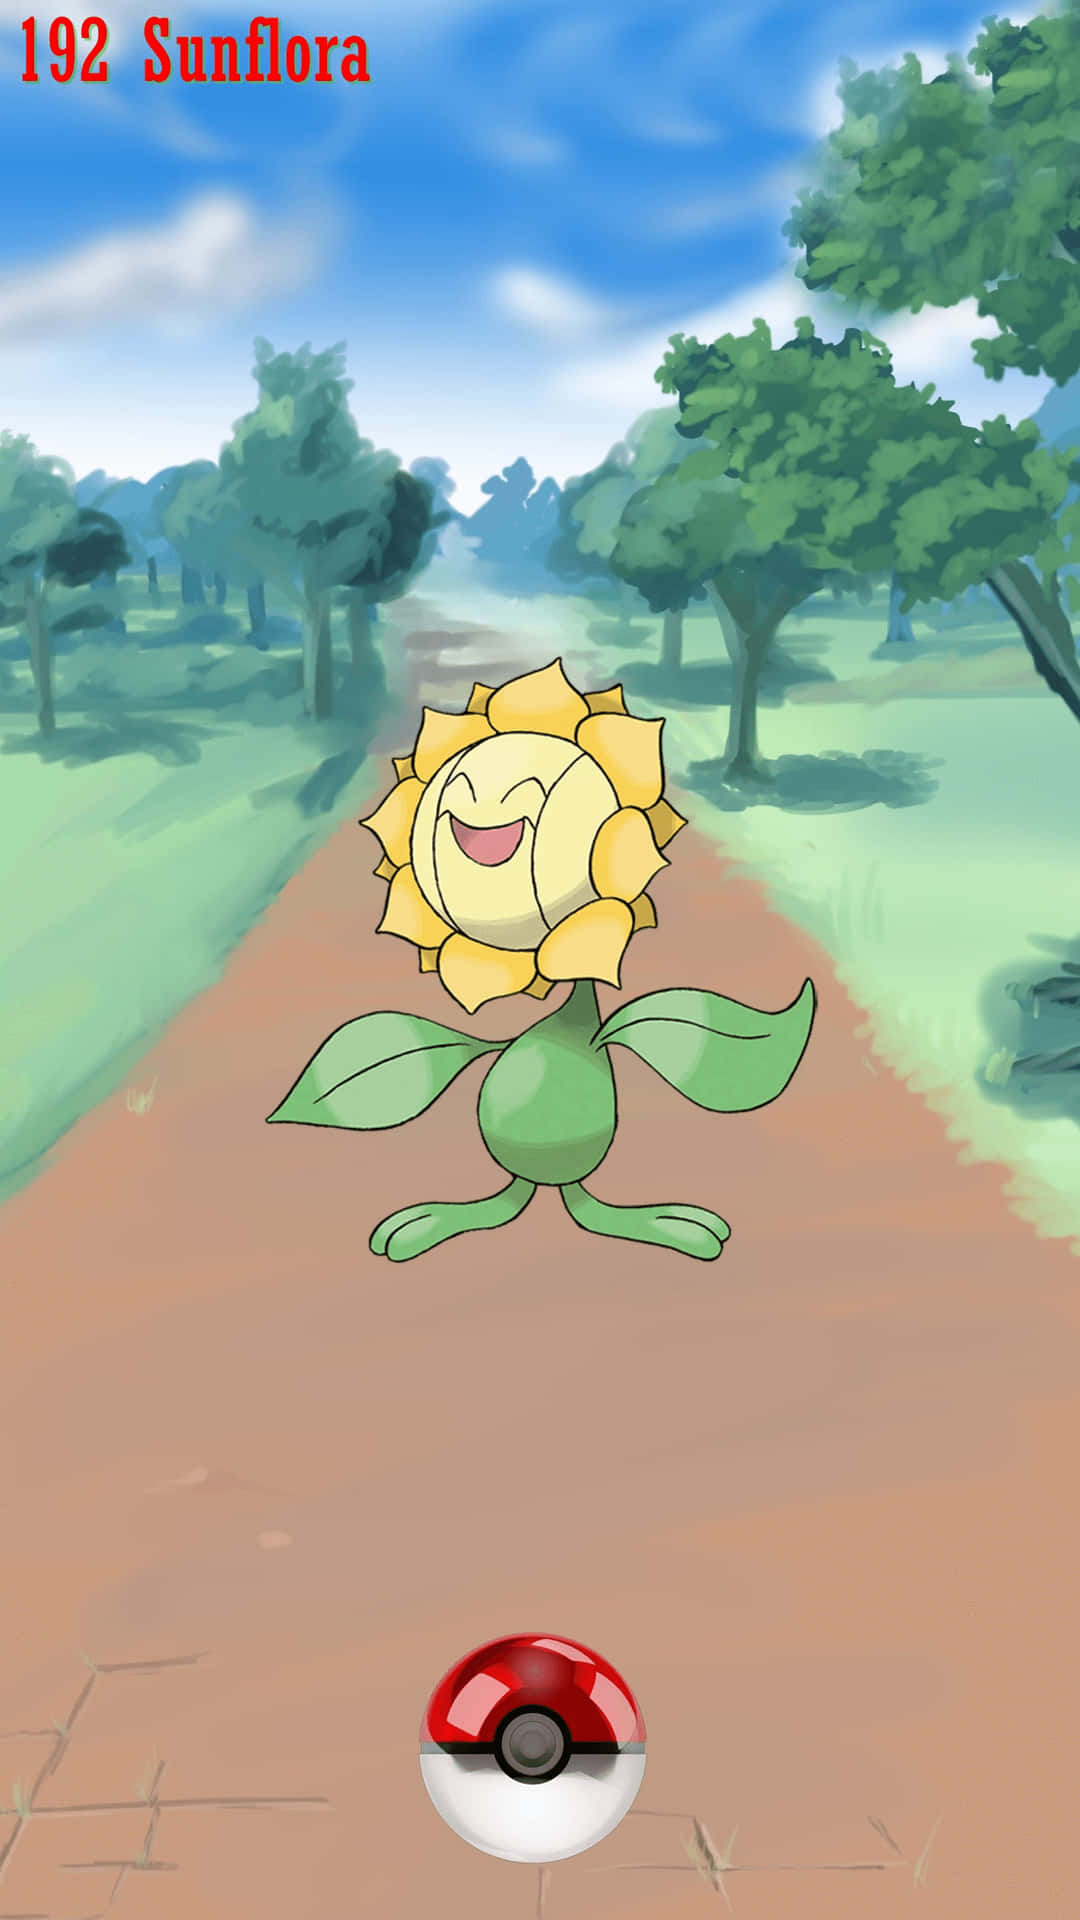 Sunflora On Dirt Path With Pokeball Wallpaper